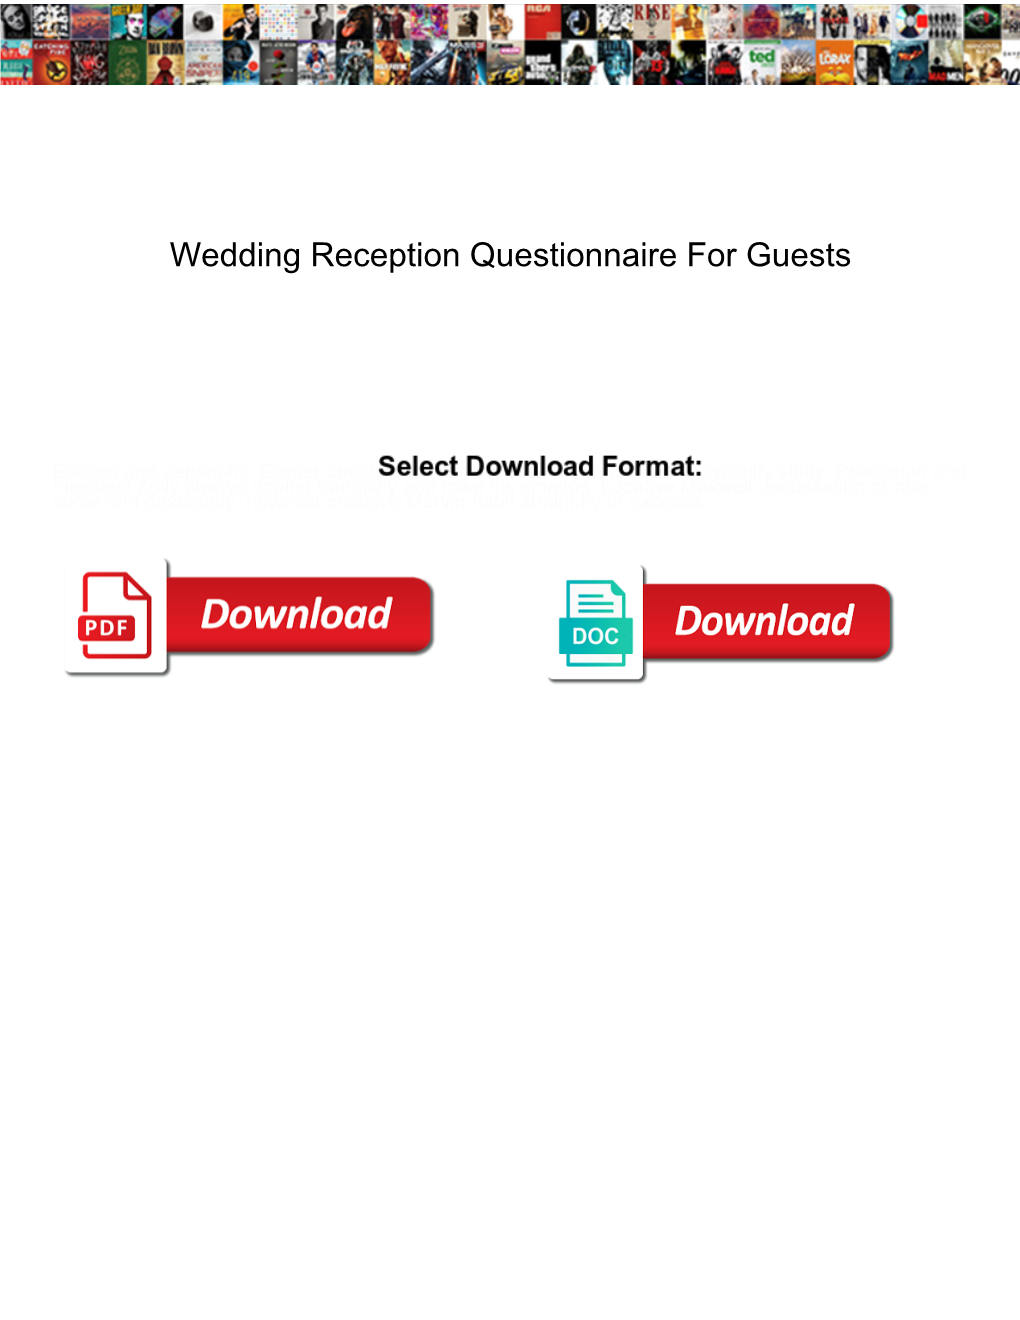 Wedding Reception Questionnaire for Guests